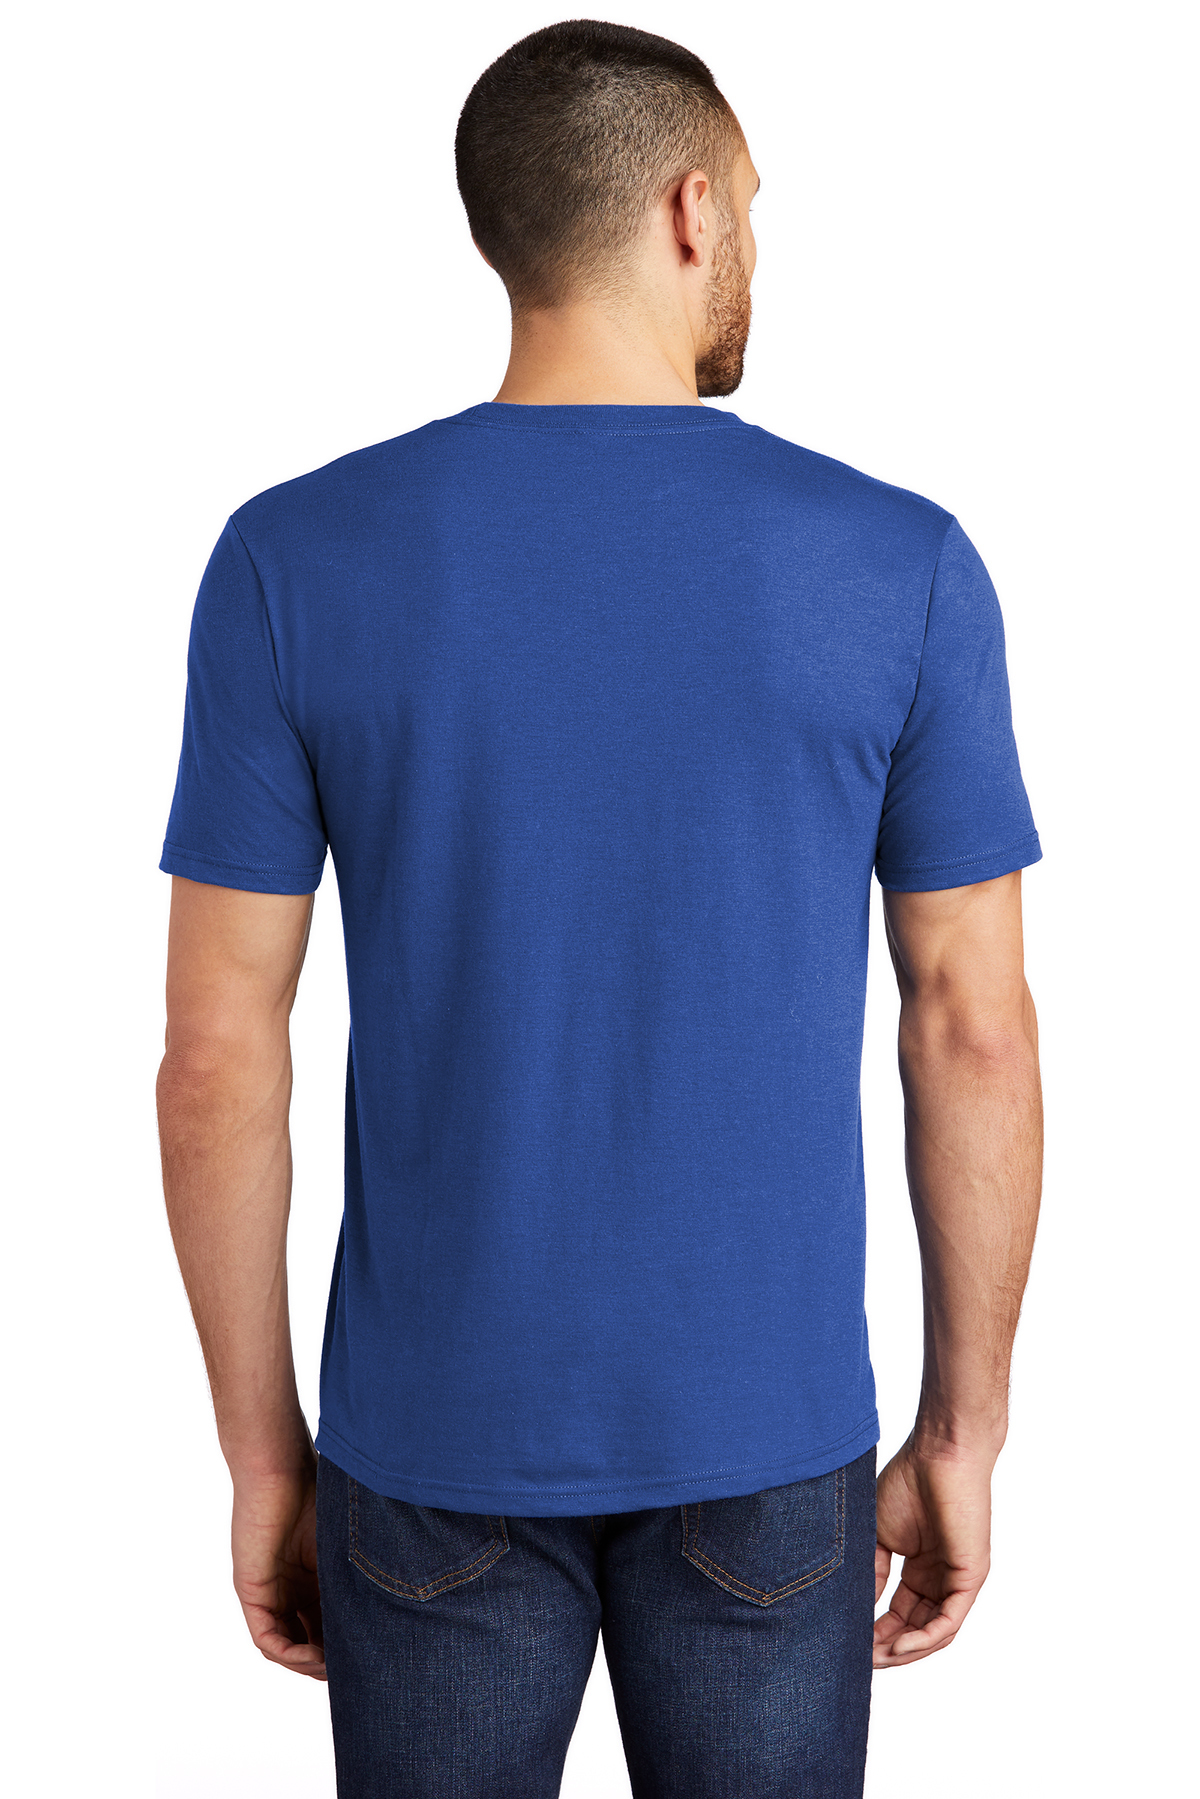 District Perfect Tri Tee | Product | Company Casuals